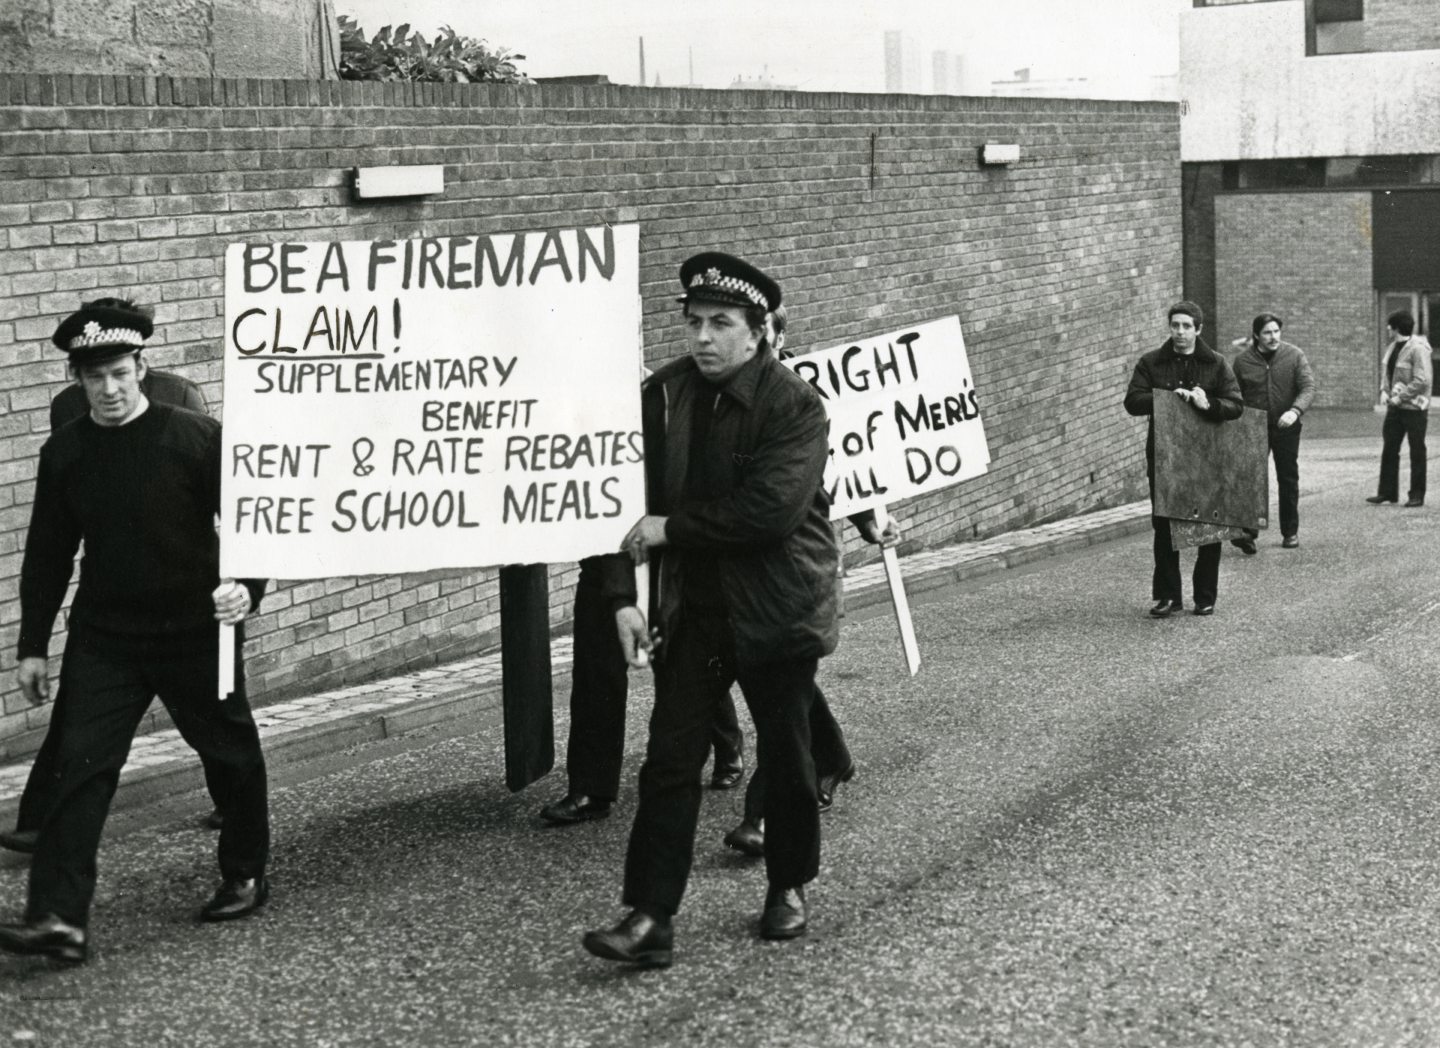 Firemen finish their last shift before strike then walk out sign demanding better rights in 1977.